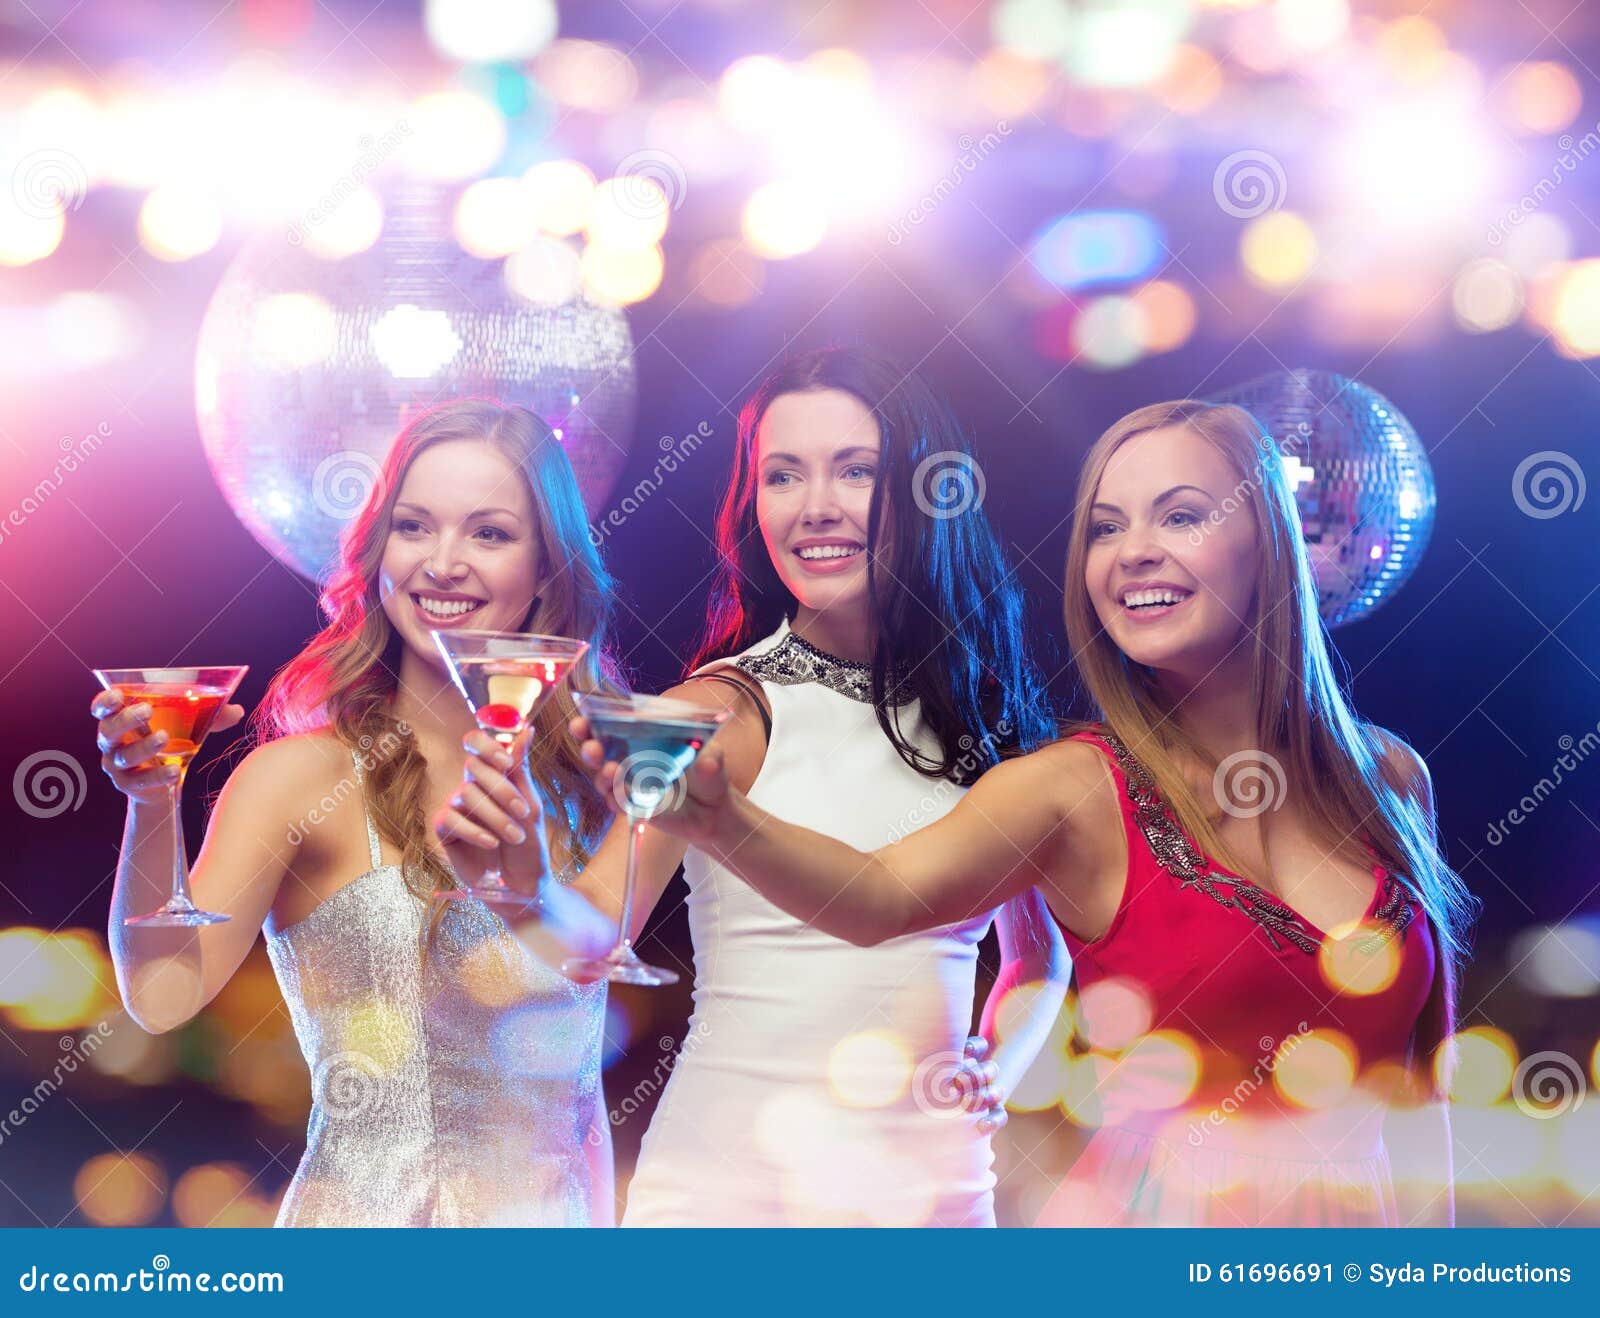 Smiling Women with Cocktails at Night Club Stock Image - Image of ...